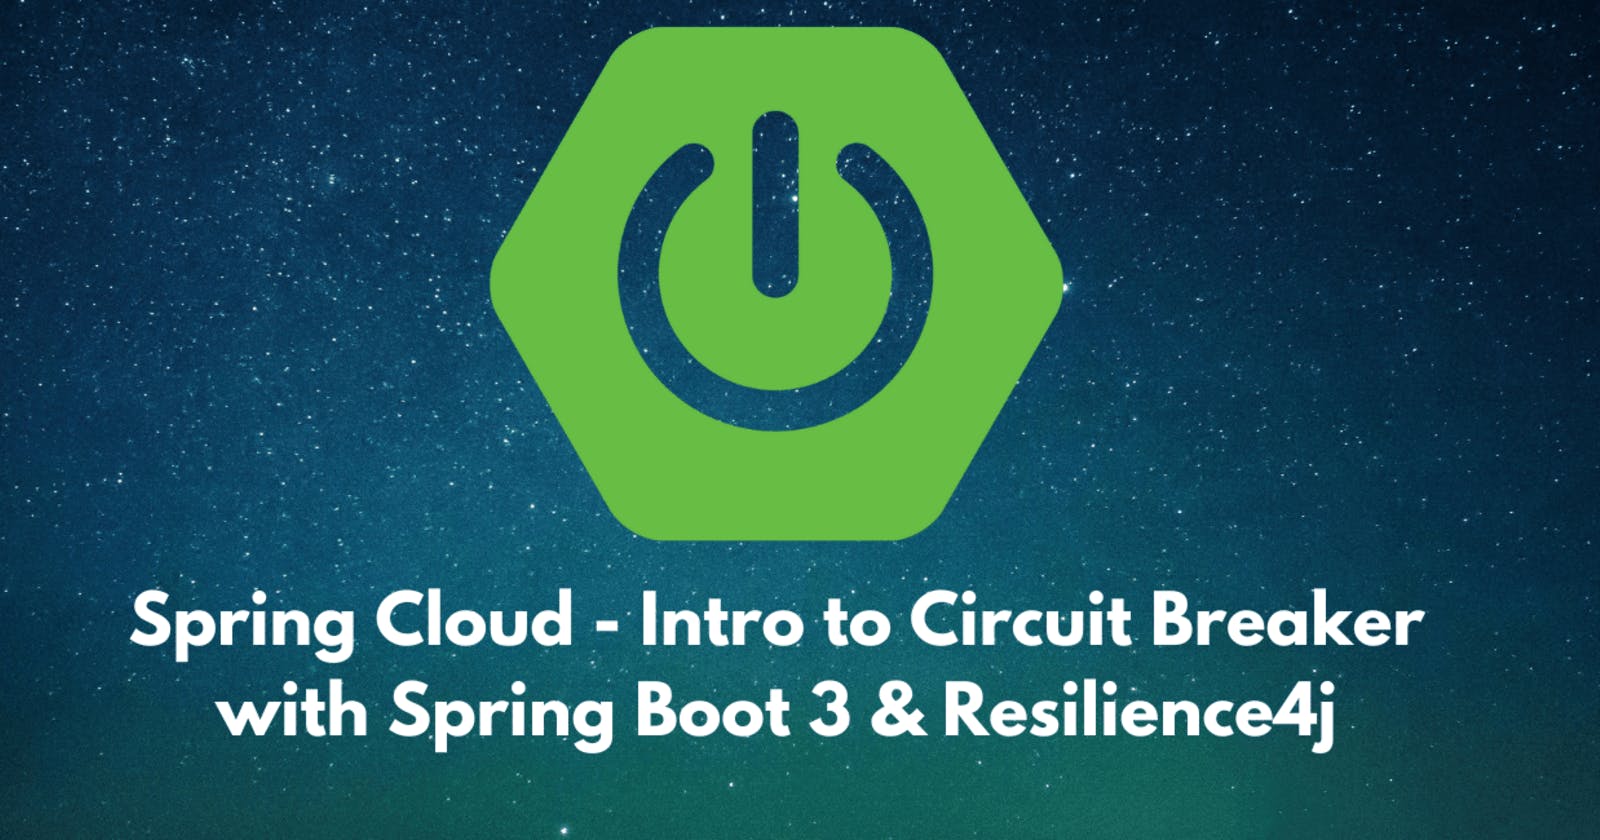 Spring Cloud - Intro to Circuit Breaker with Spring Boot 3 & Resilience4j